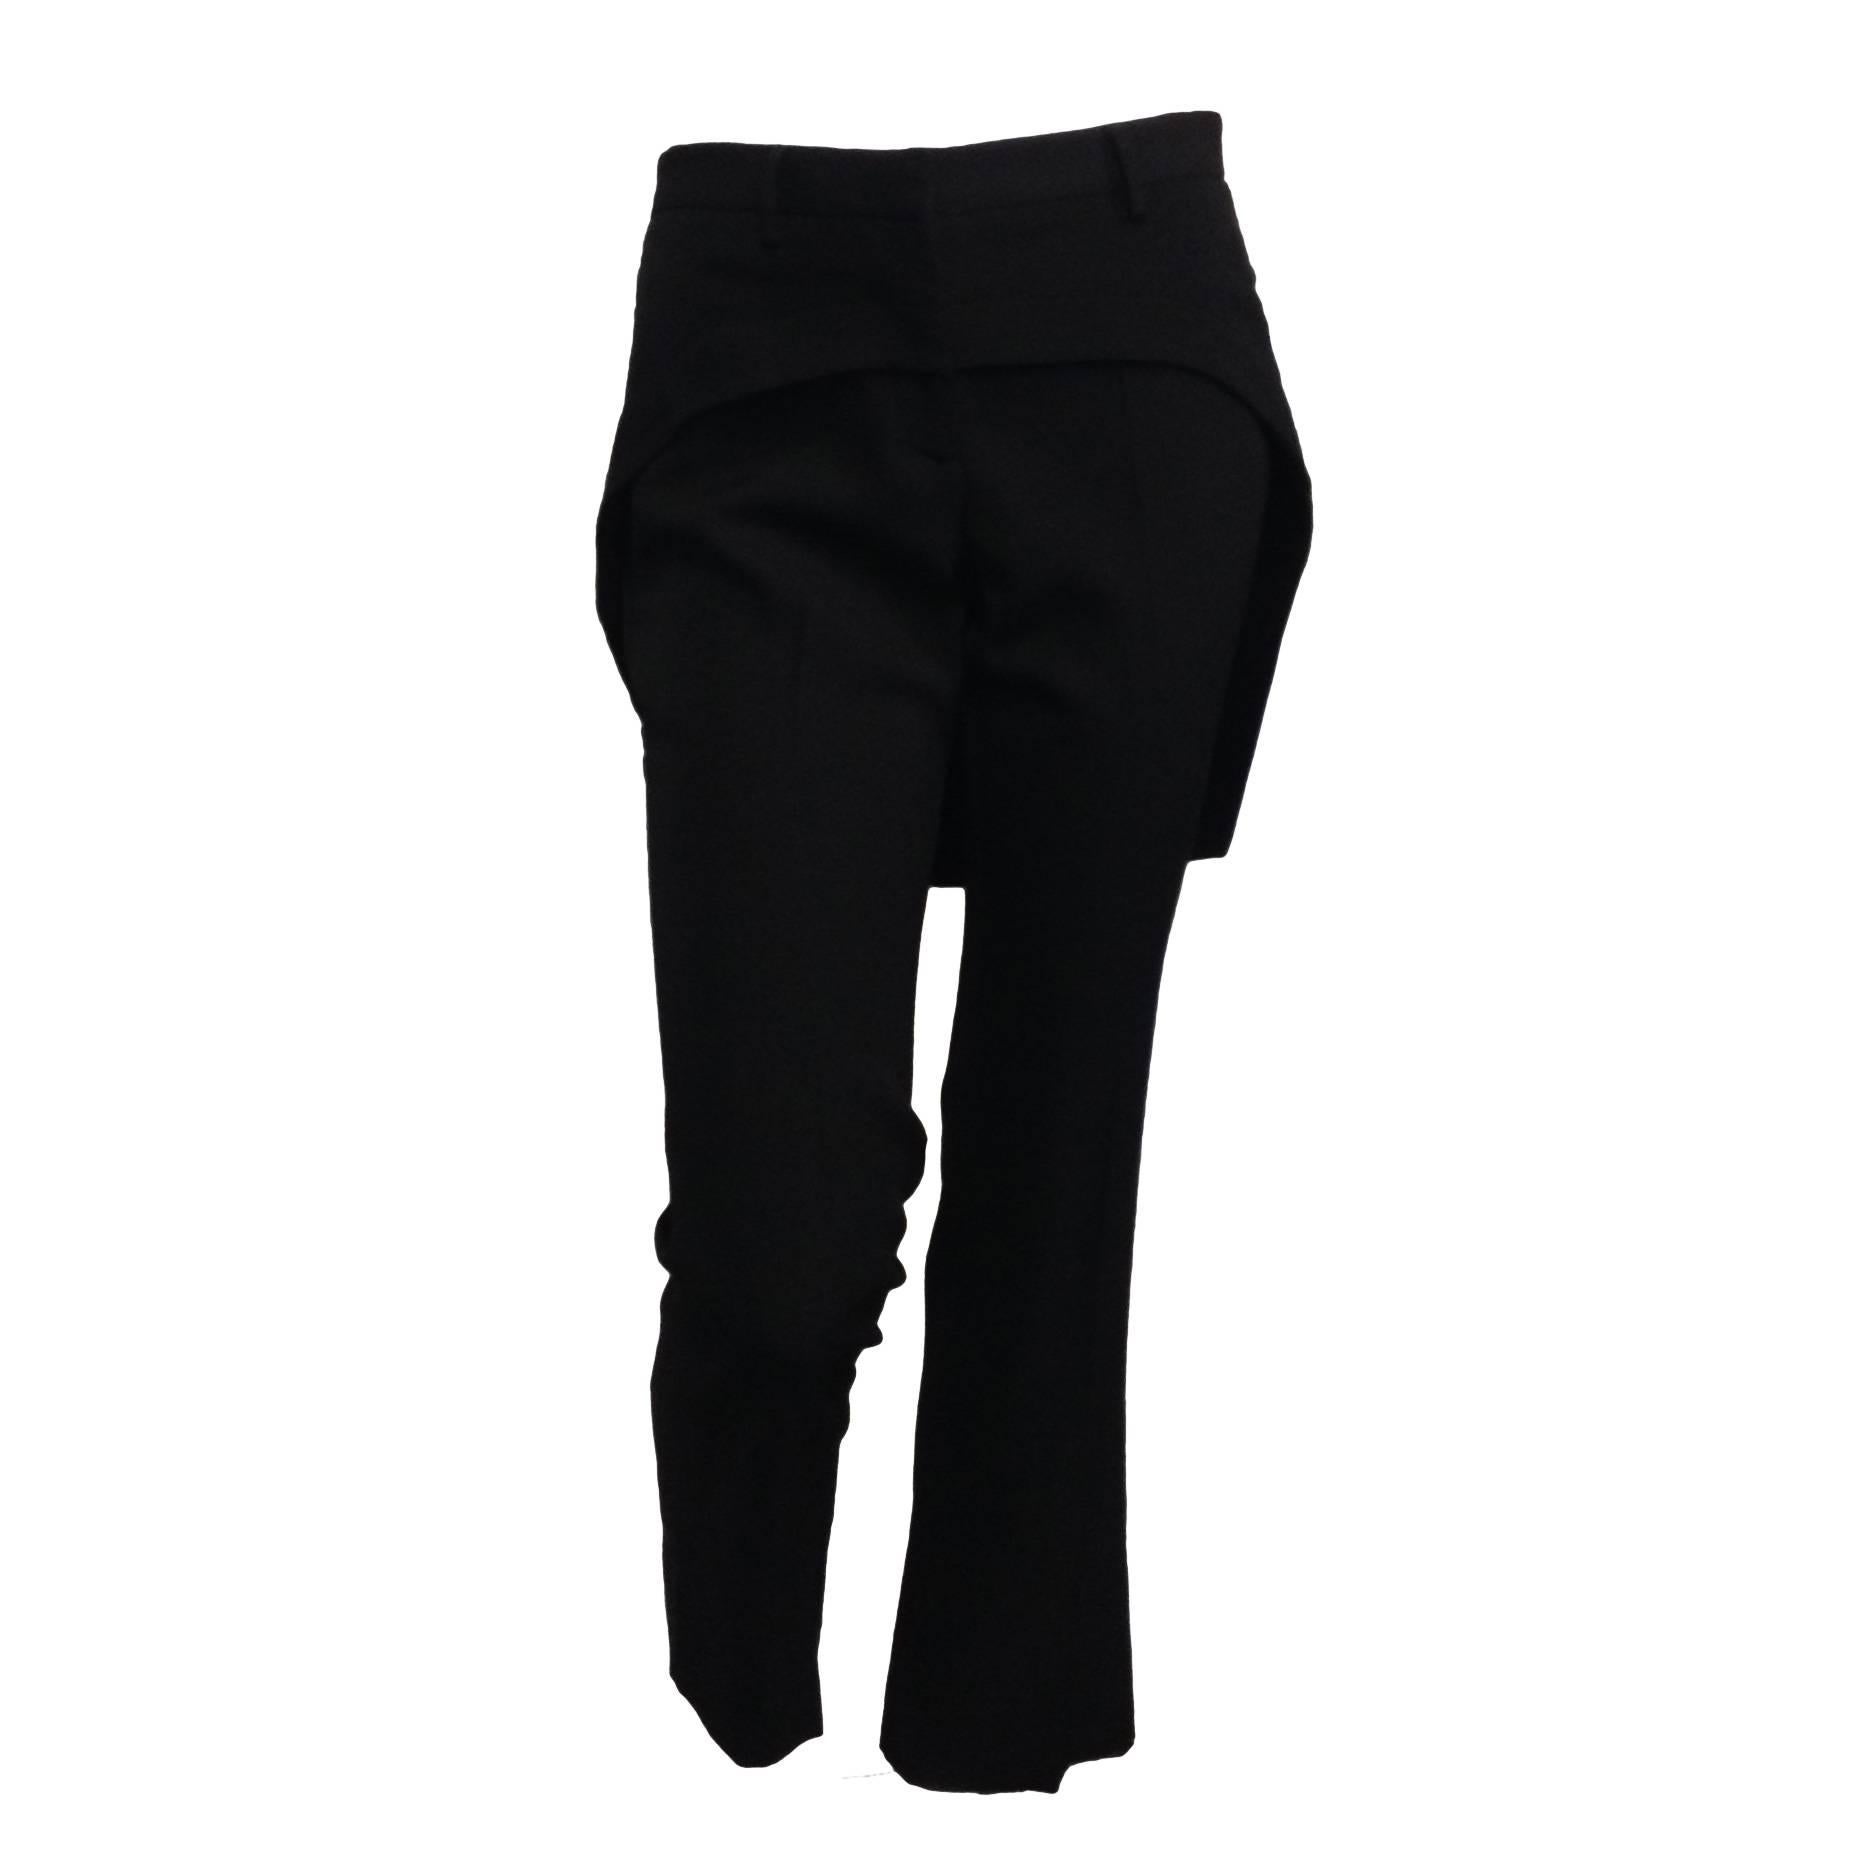 Givenchy Black Wool Pant with Tailcoat Hem